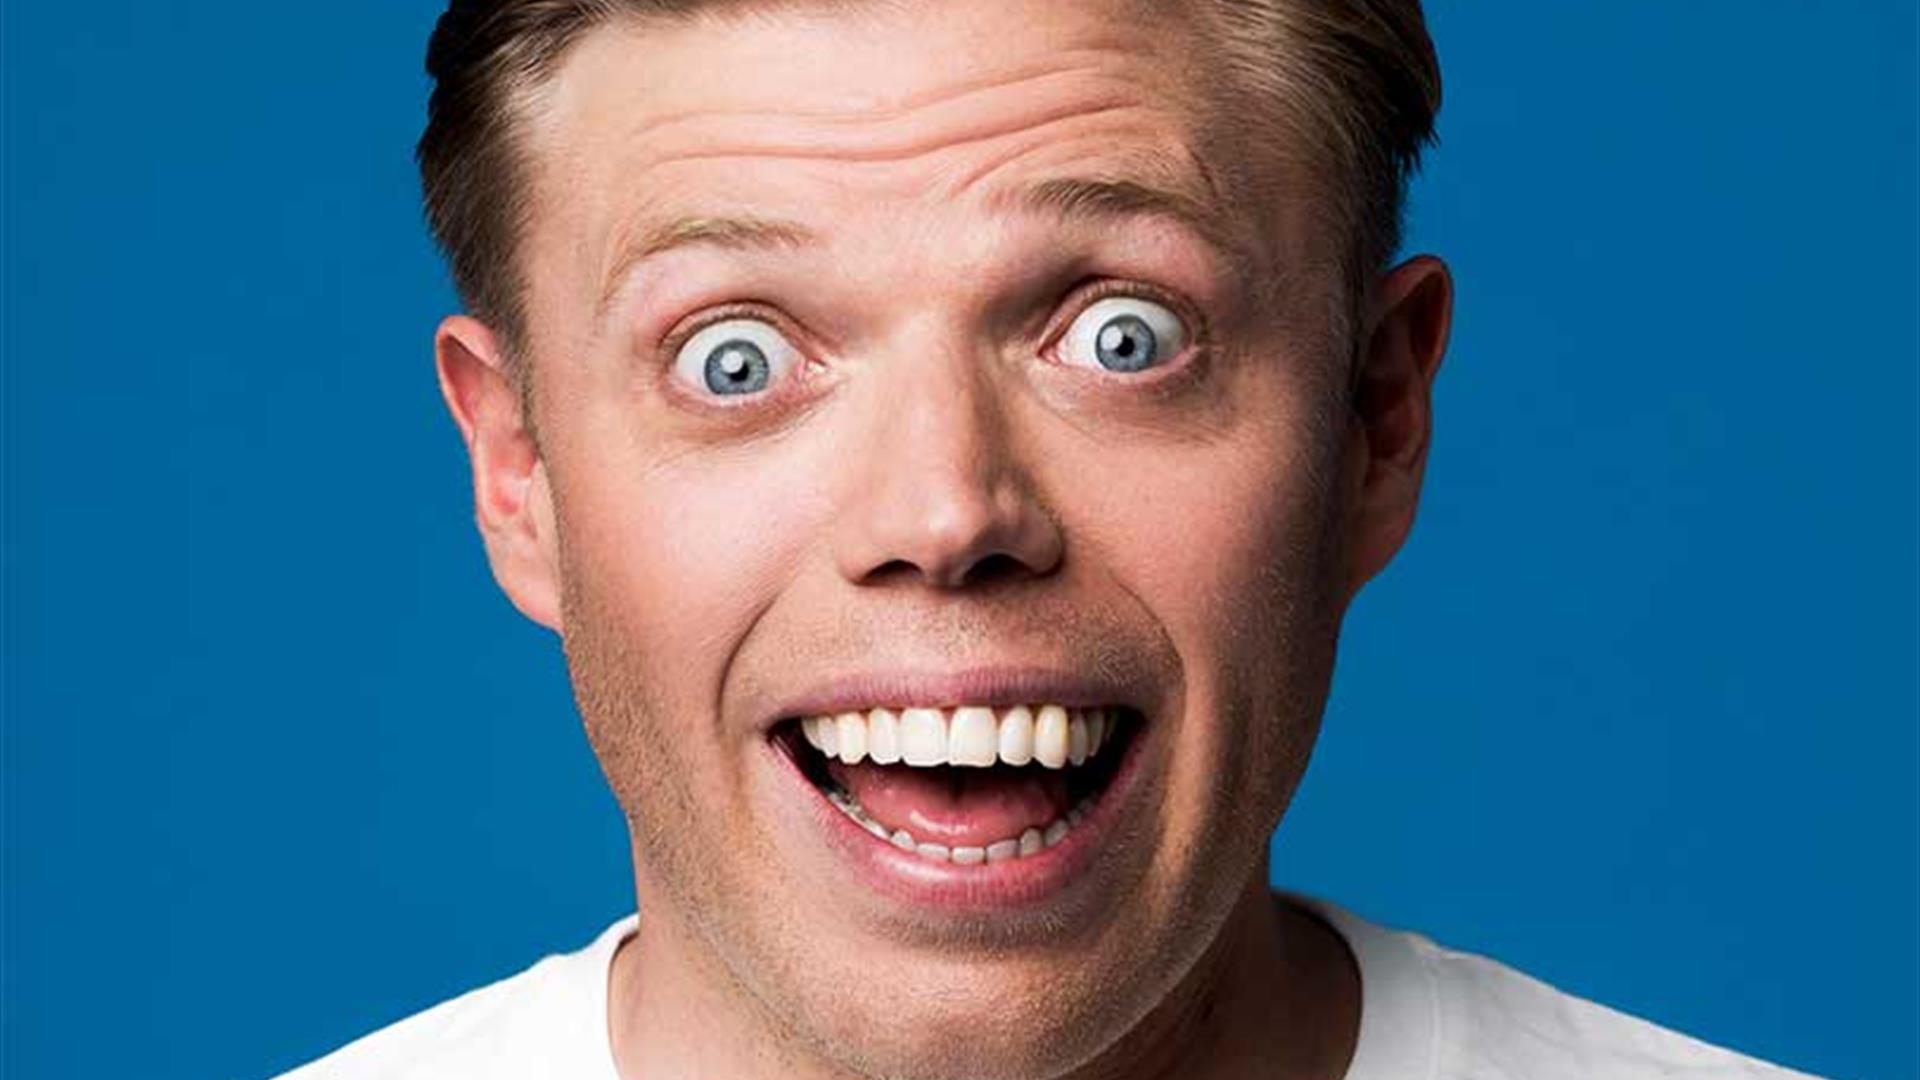 Rob Beckett Smiling widely in front of a deep blue background